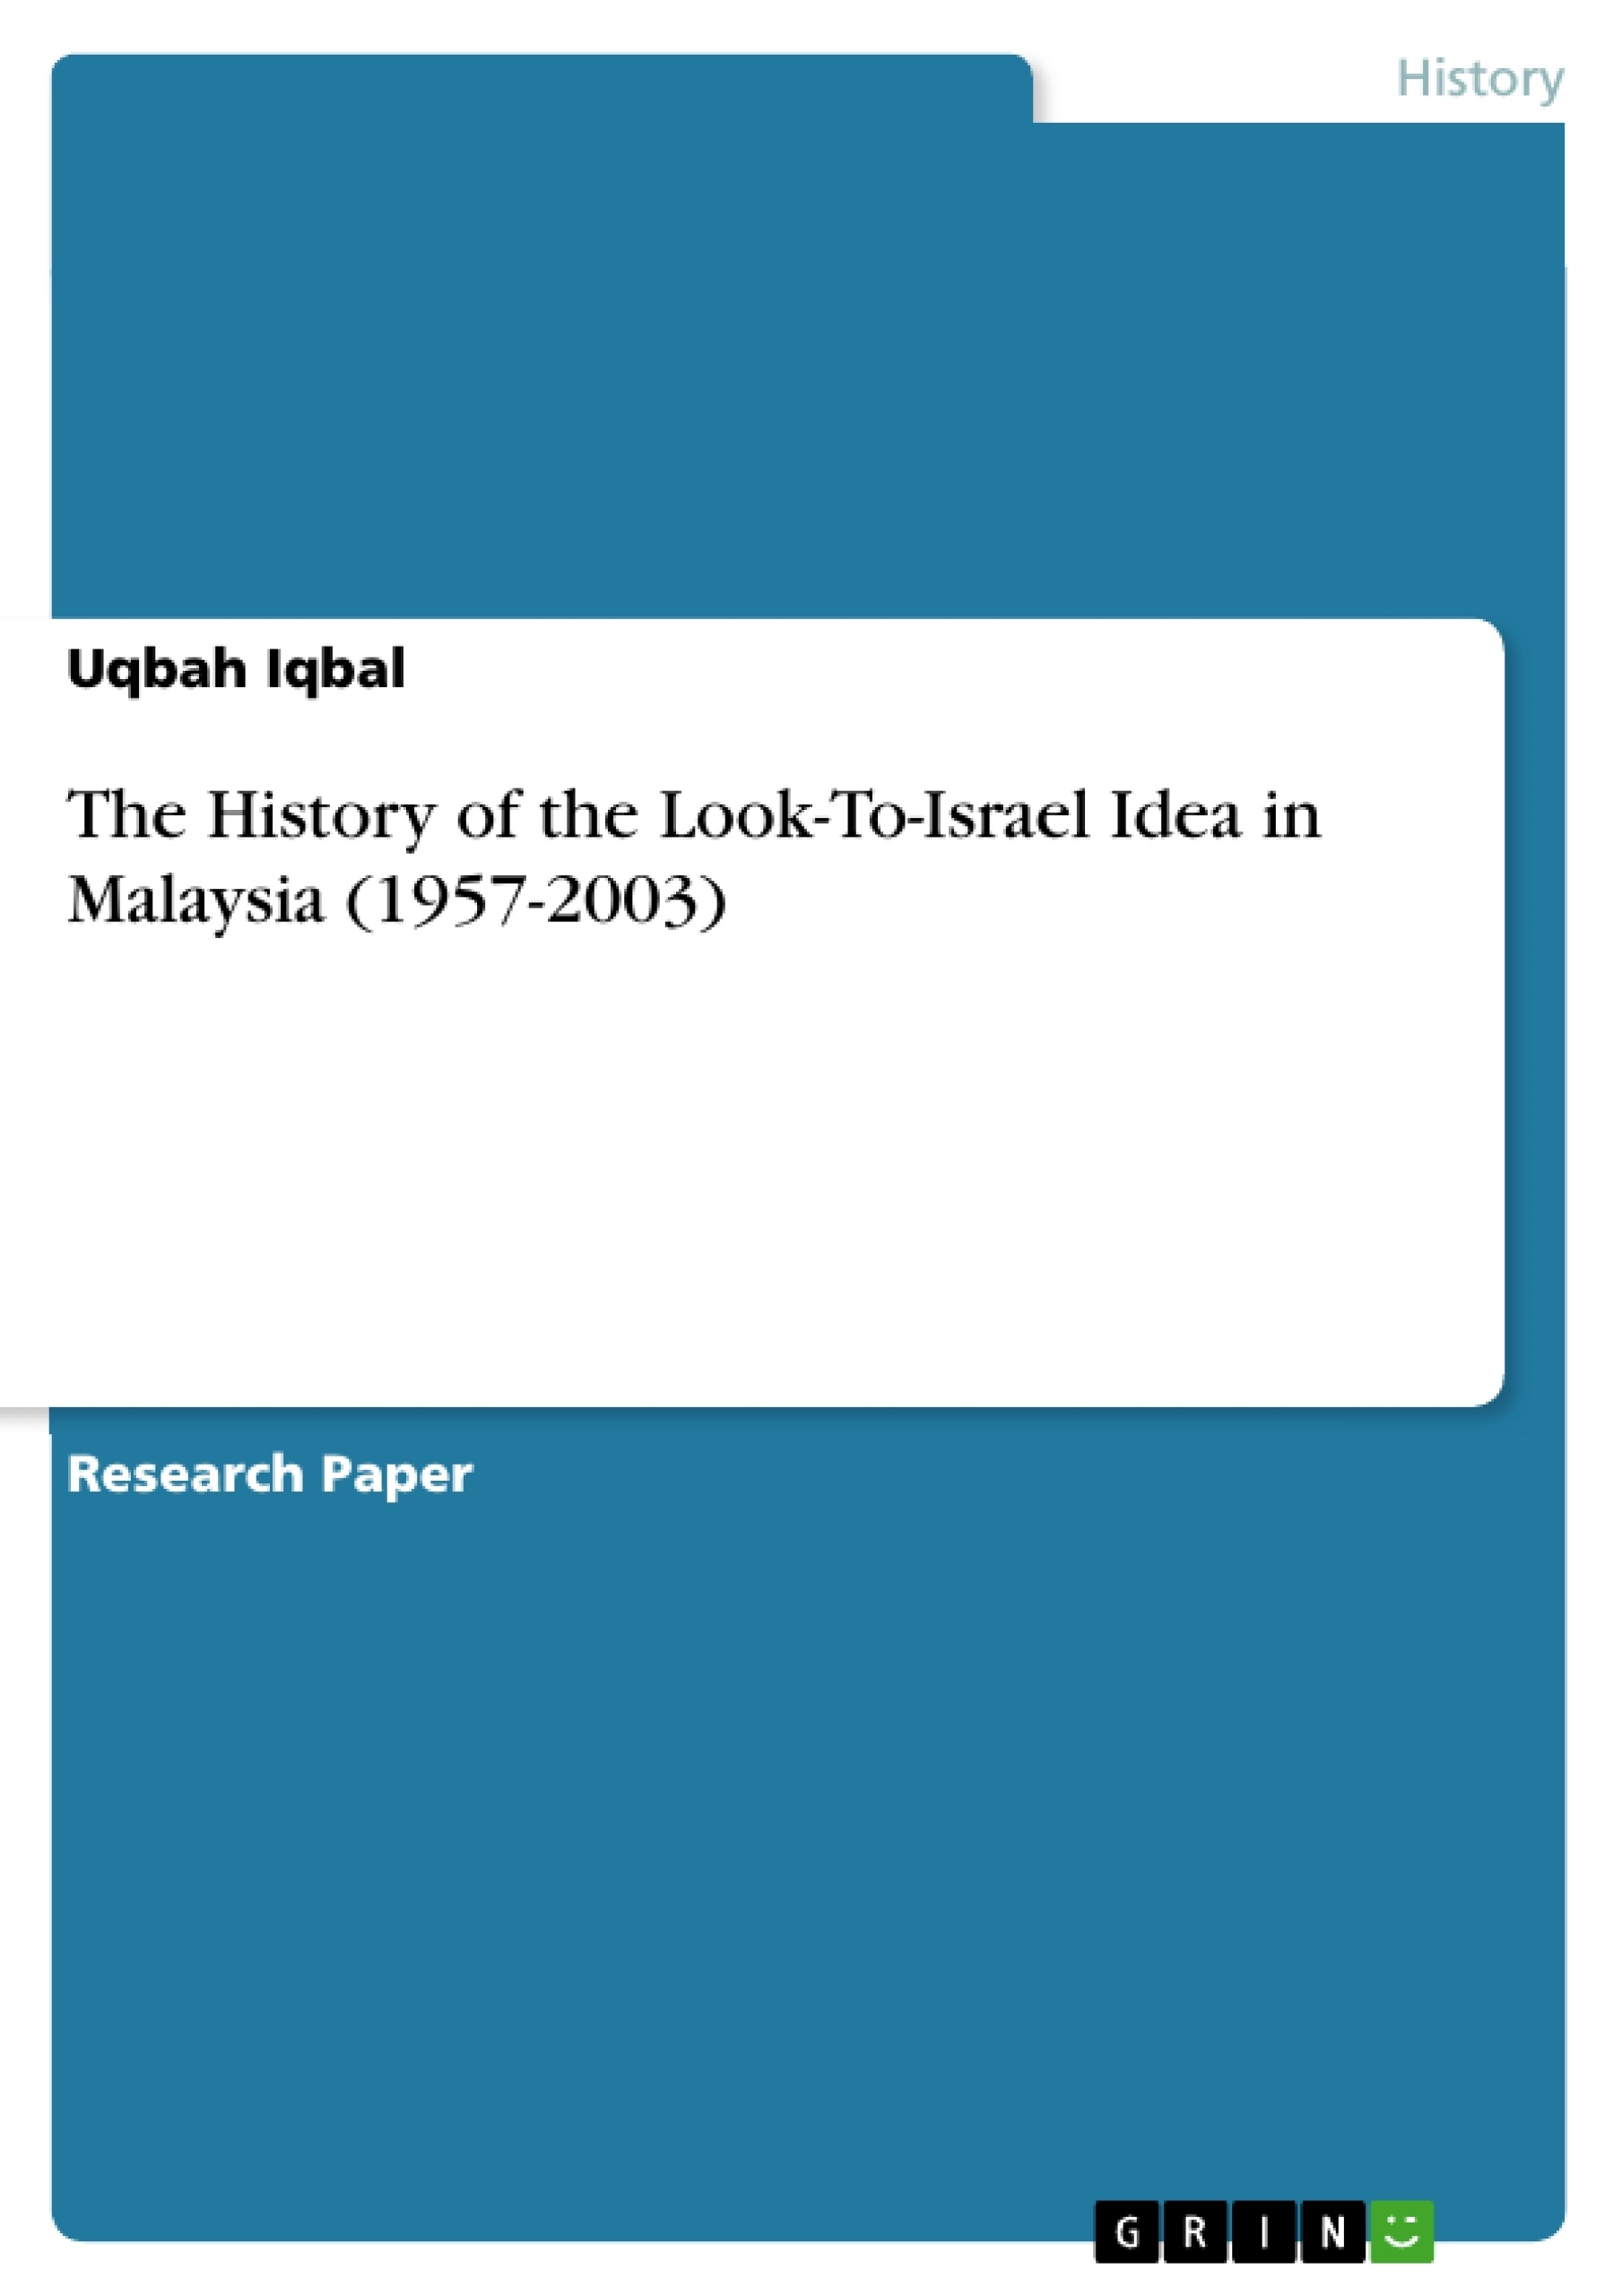 Título: The History of the Look-To-Israel Idea in Malaysia (1957-2003)